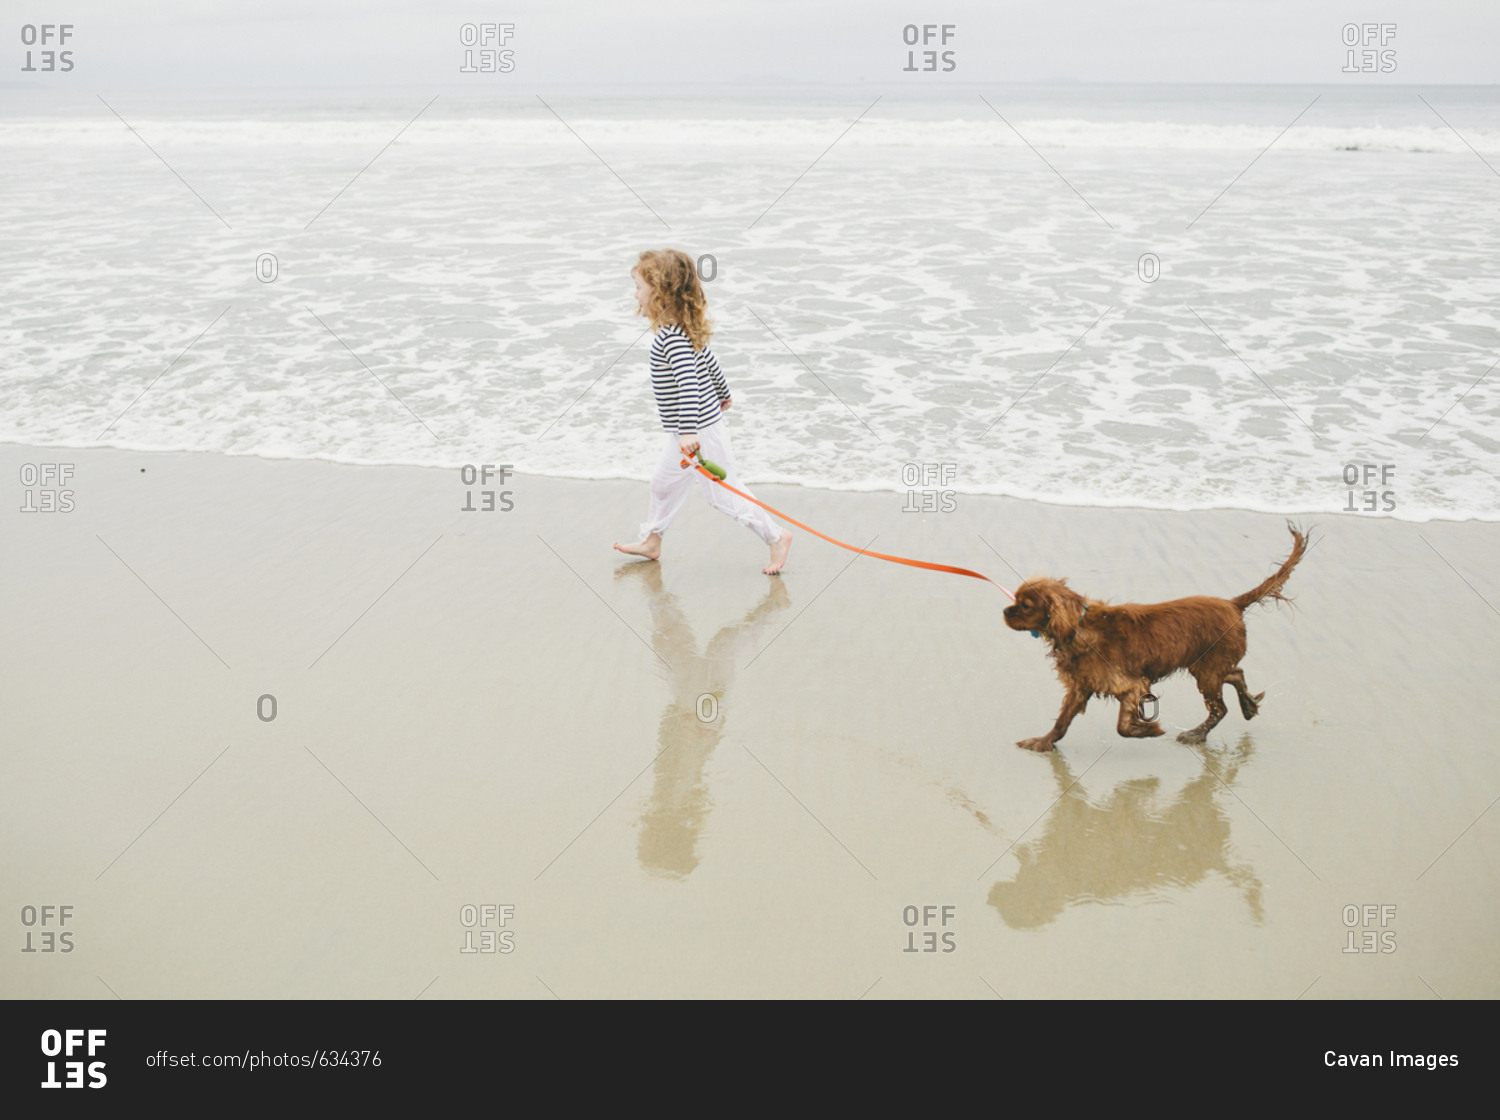 High angle view of girl holding pet leash while walking with dog on shore at beach